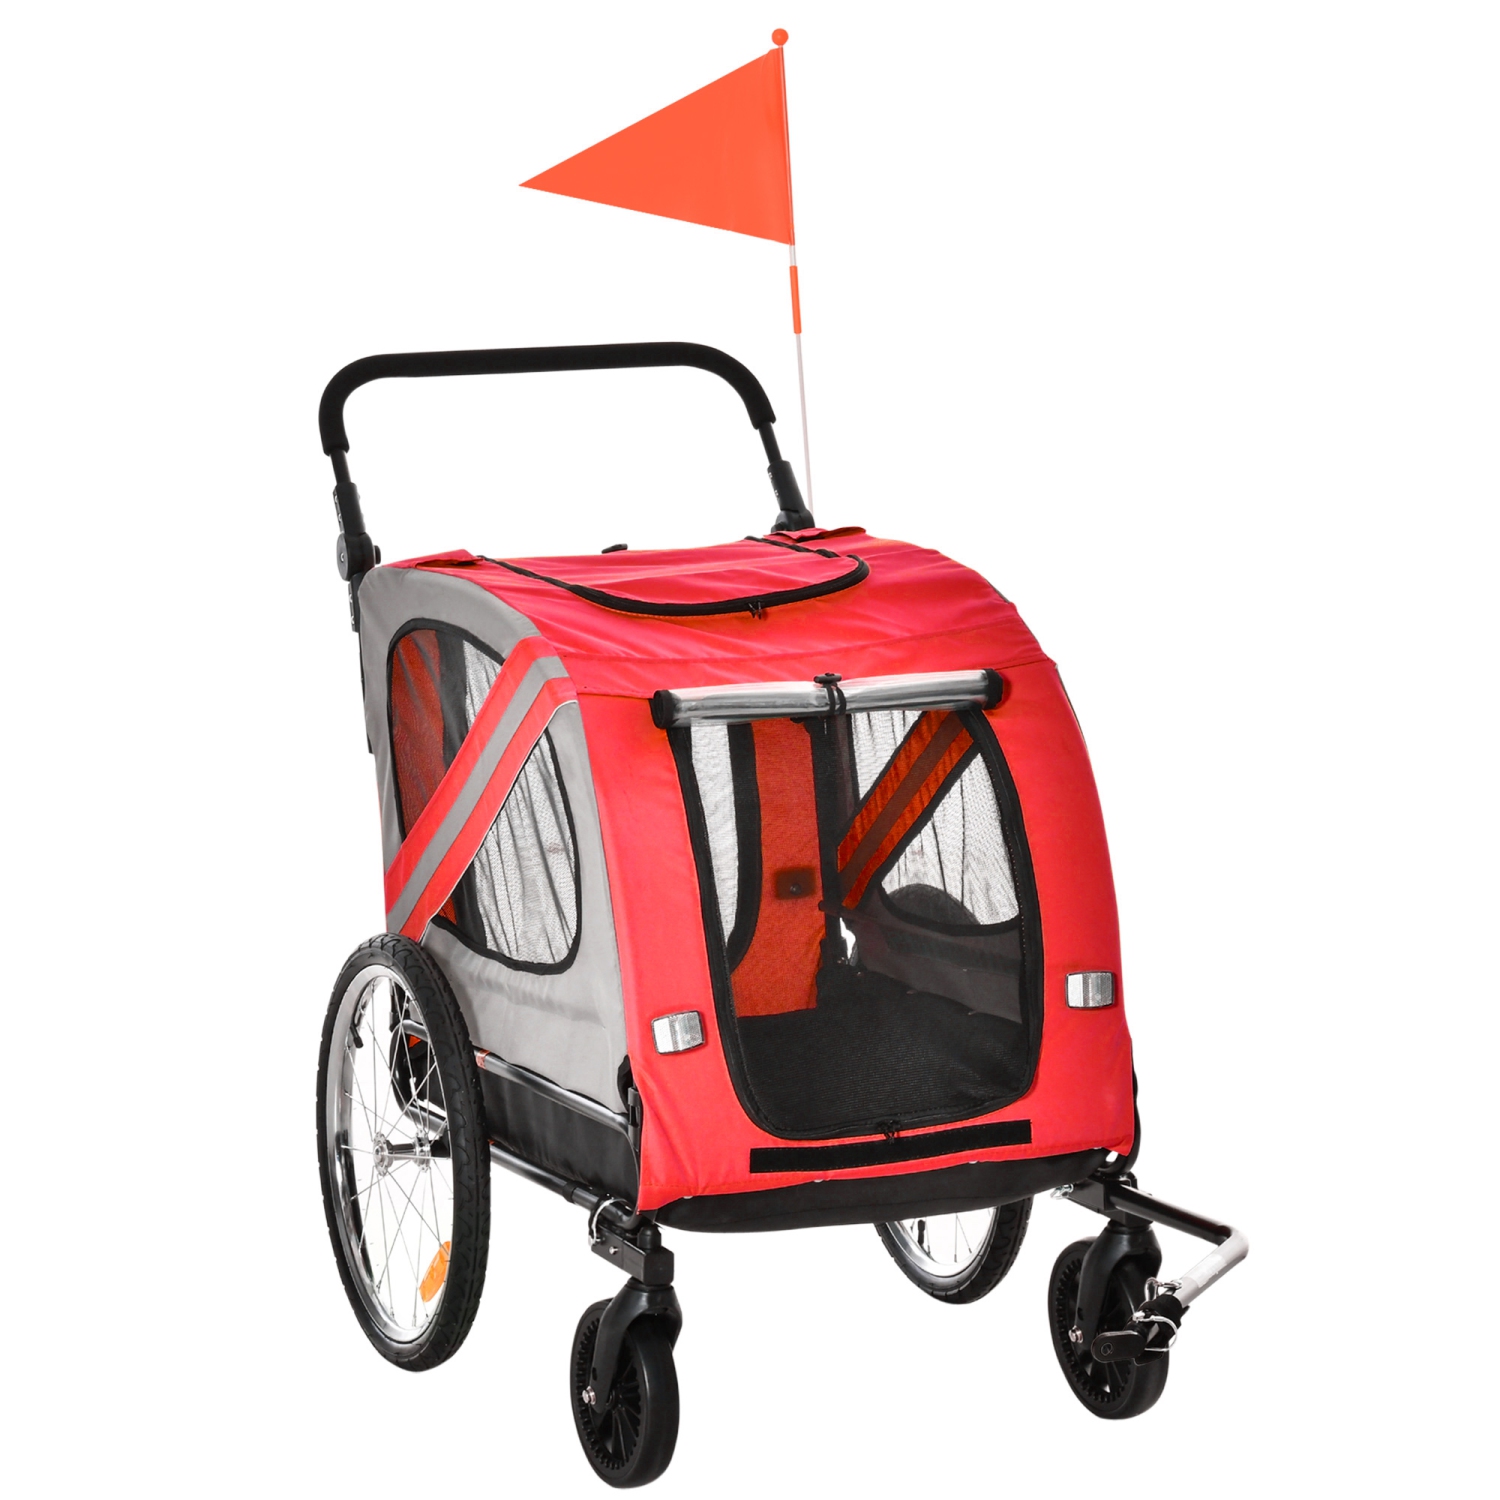 Aosom Dog Bike Trailer 2-in-1 Pet Stroller Cart Bicycle Wagon Cargo Carrier Attachment for Travel with Universal Wheel Reflectors Flag Red